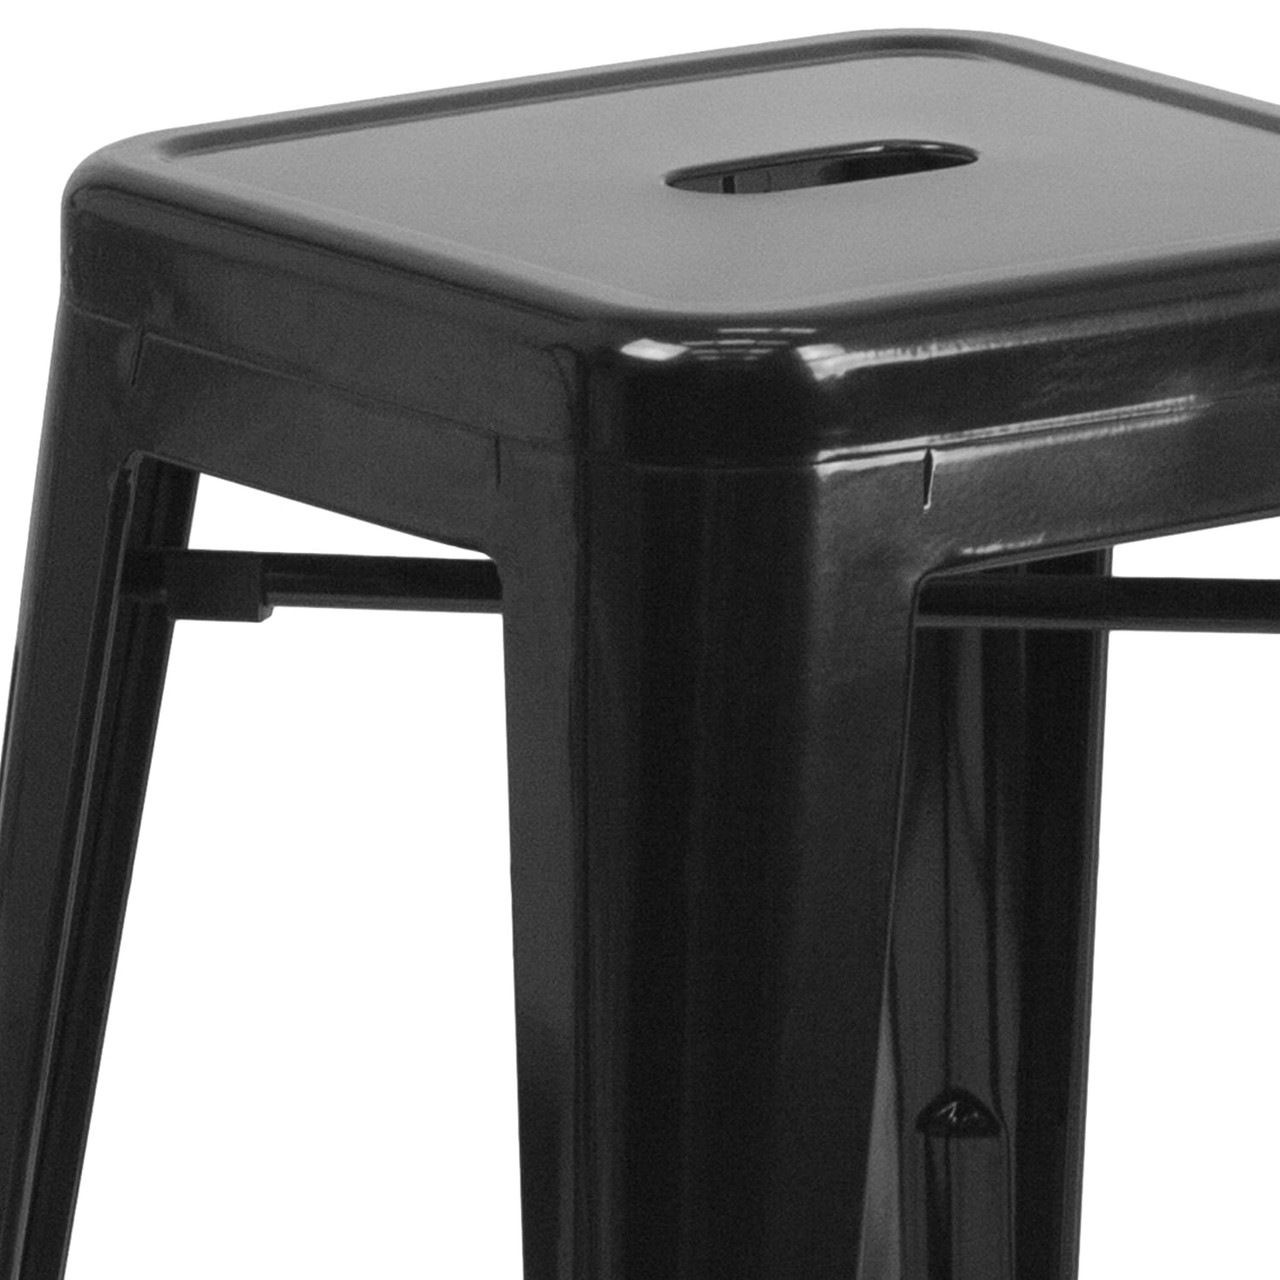 4 Pack 30” High Backless Black Metal Indoor-Outdoor Barstool with Square Seat